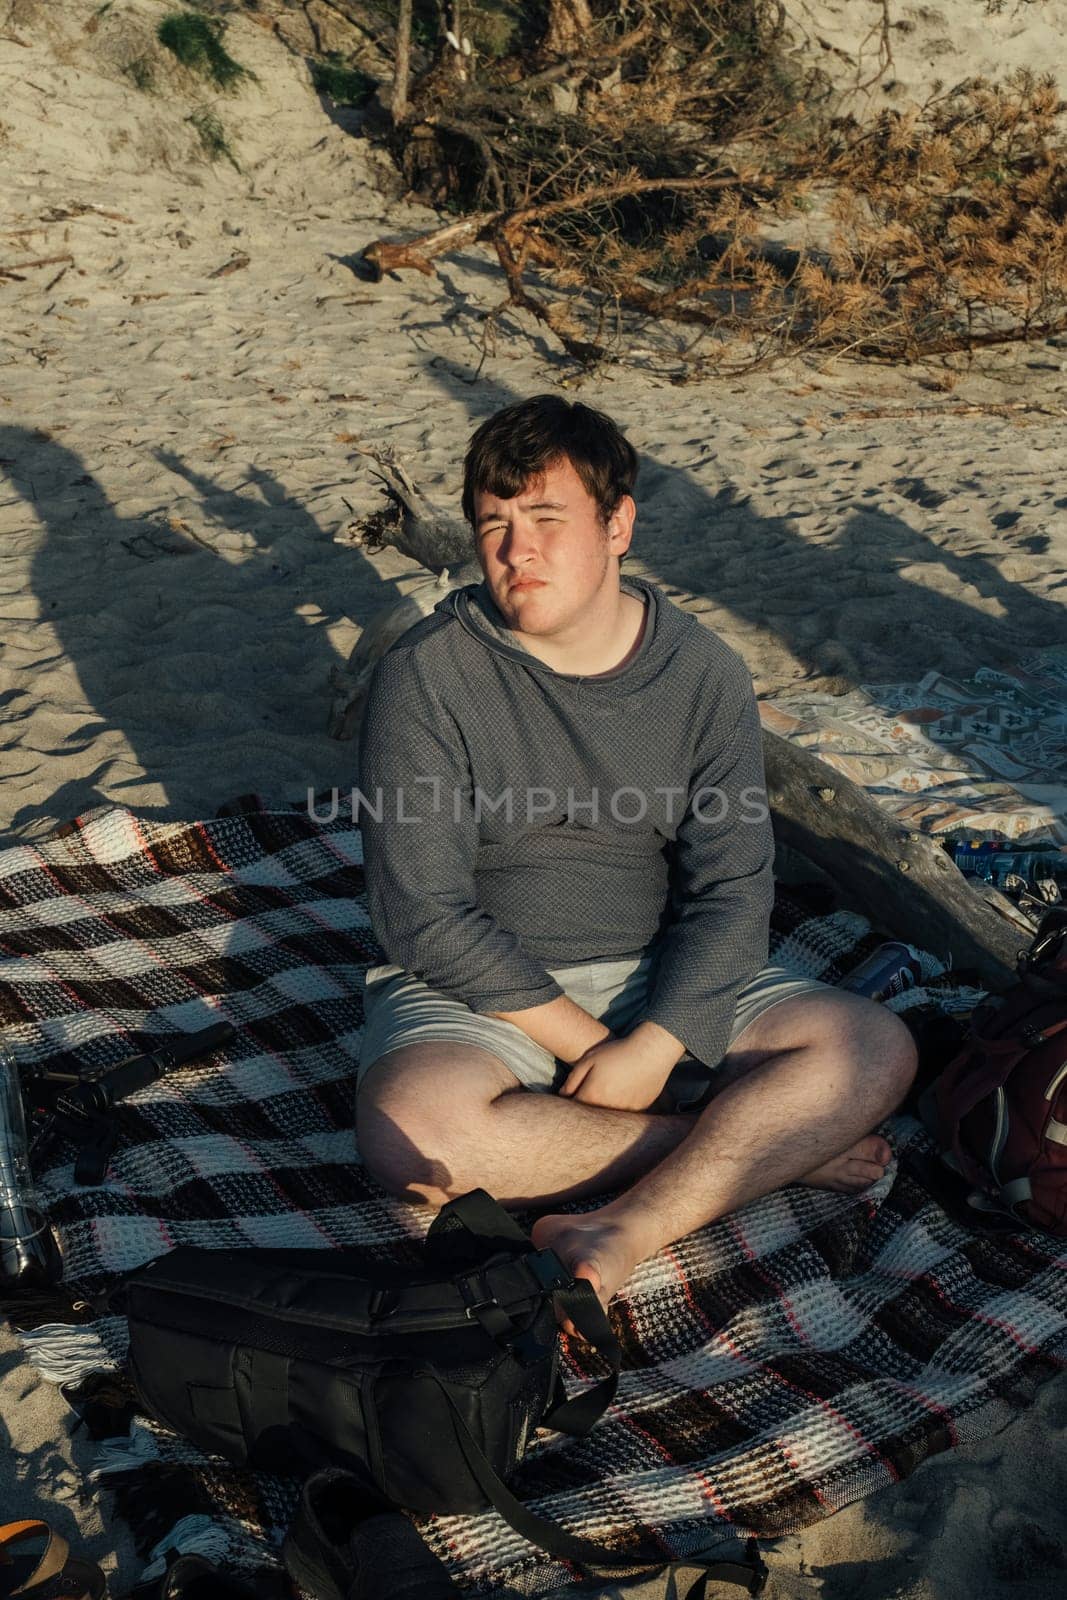 A man sits on a blanket on the sandy beach, gazing out at the ocean. The sun shines brightly overhead, casting a warm glow on the scene.